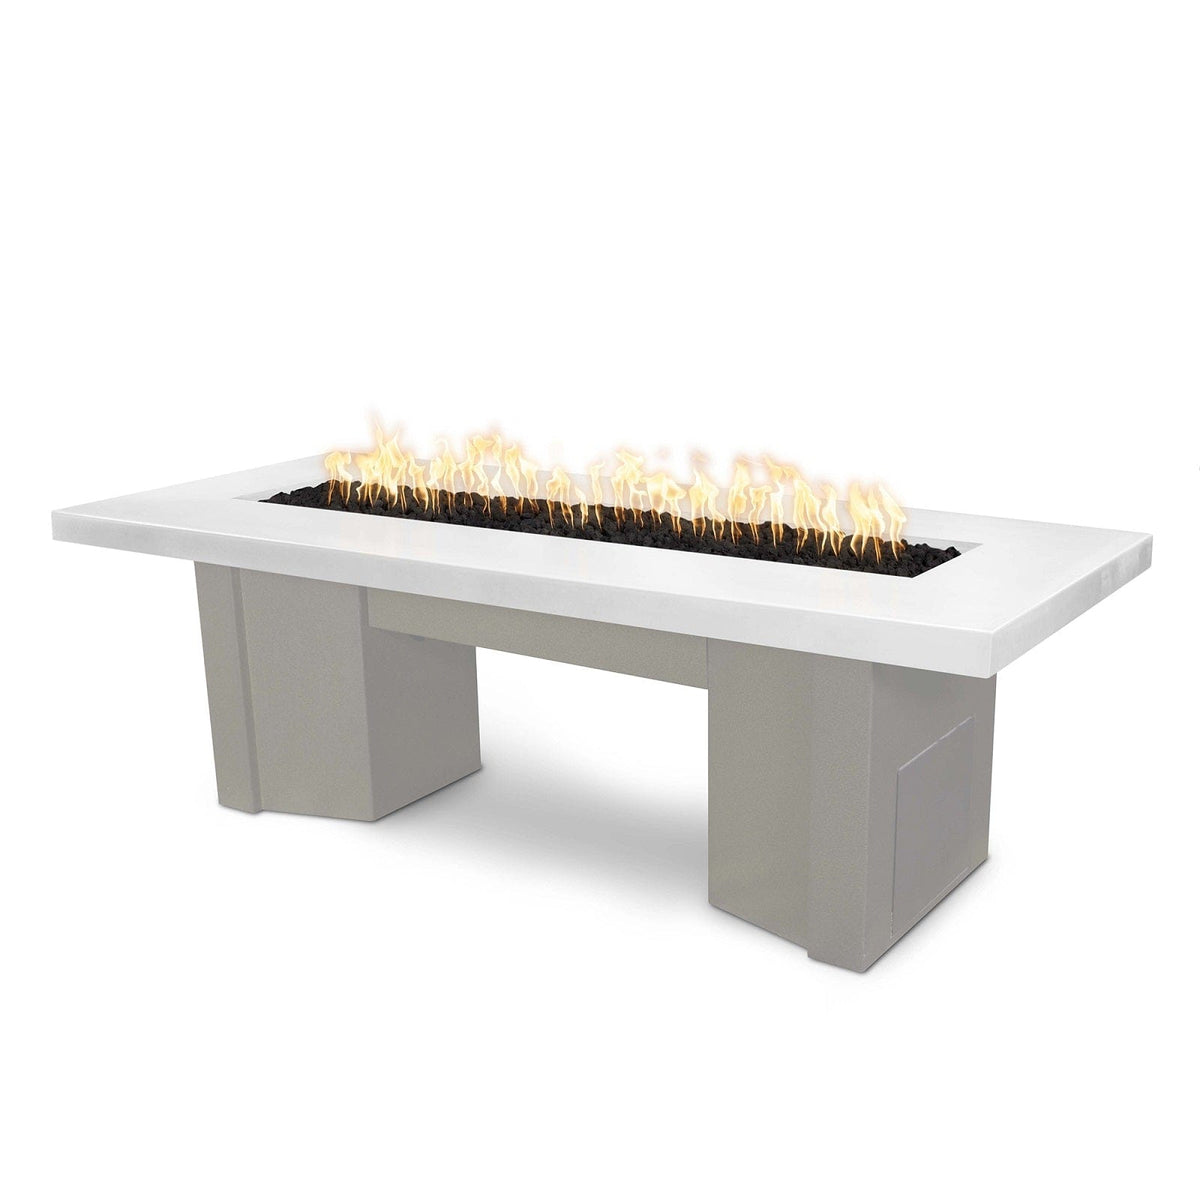 The Outdoor Plus Fire Features Limestone (-LIM) / Pewter Powder Coated Steel (-PEW) The Outdoor Plus 60&quot; Alameda Fire Table Smooth Concrete in Natural Gas - Flame Sense System with Push Button Spark Igniter / OPT-ALMGFRC60FSEN-NG